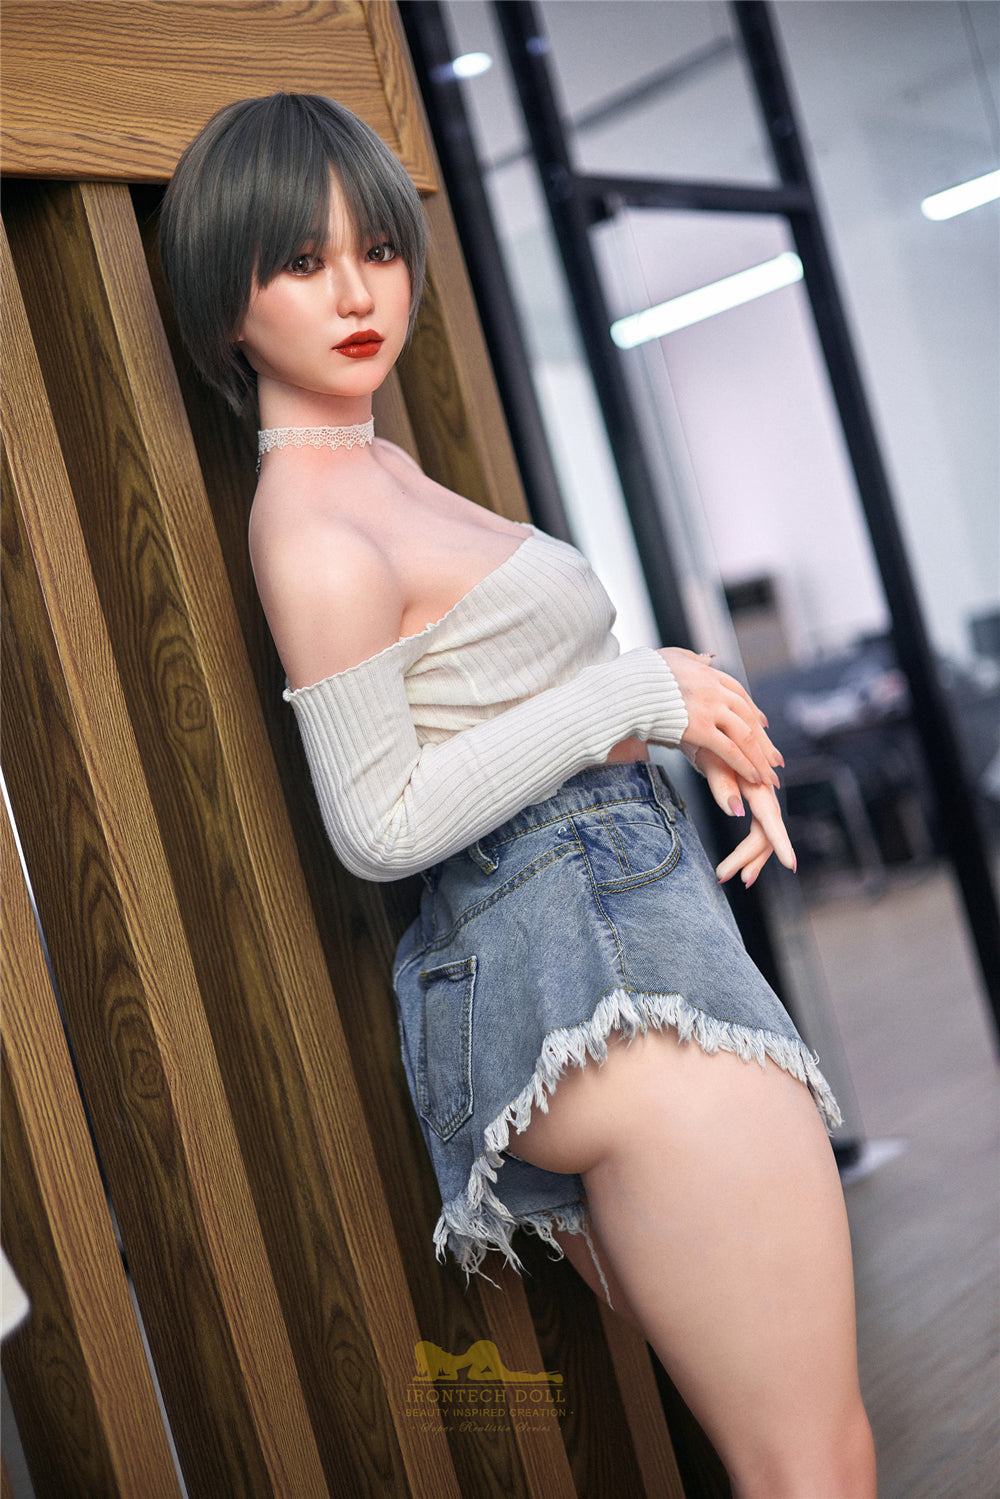 Irontech - Silicone Real Size Sex Doll - 5ft (152cm) - Jocelyn - Love Dolls 4U